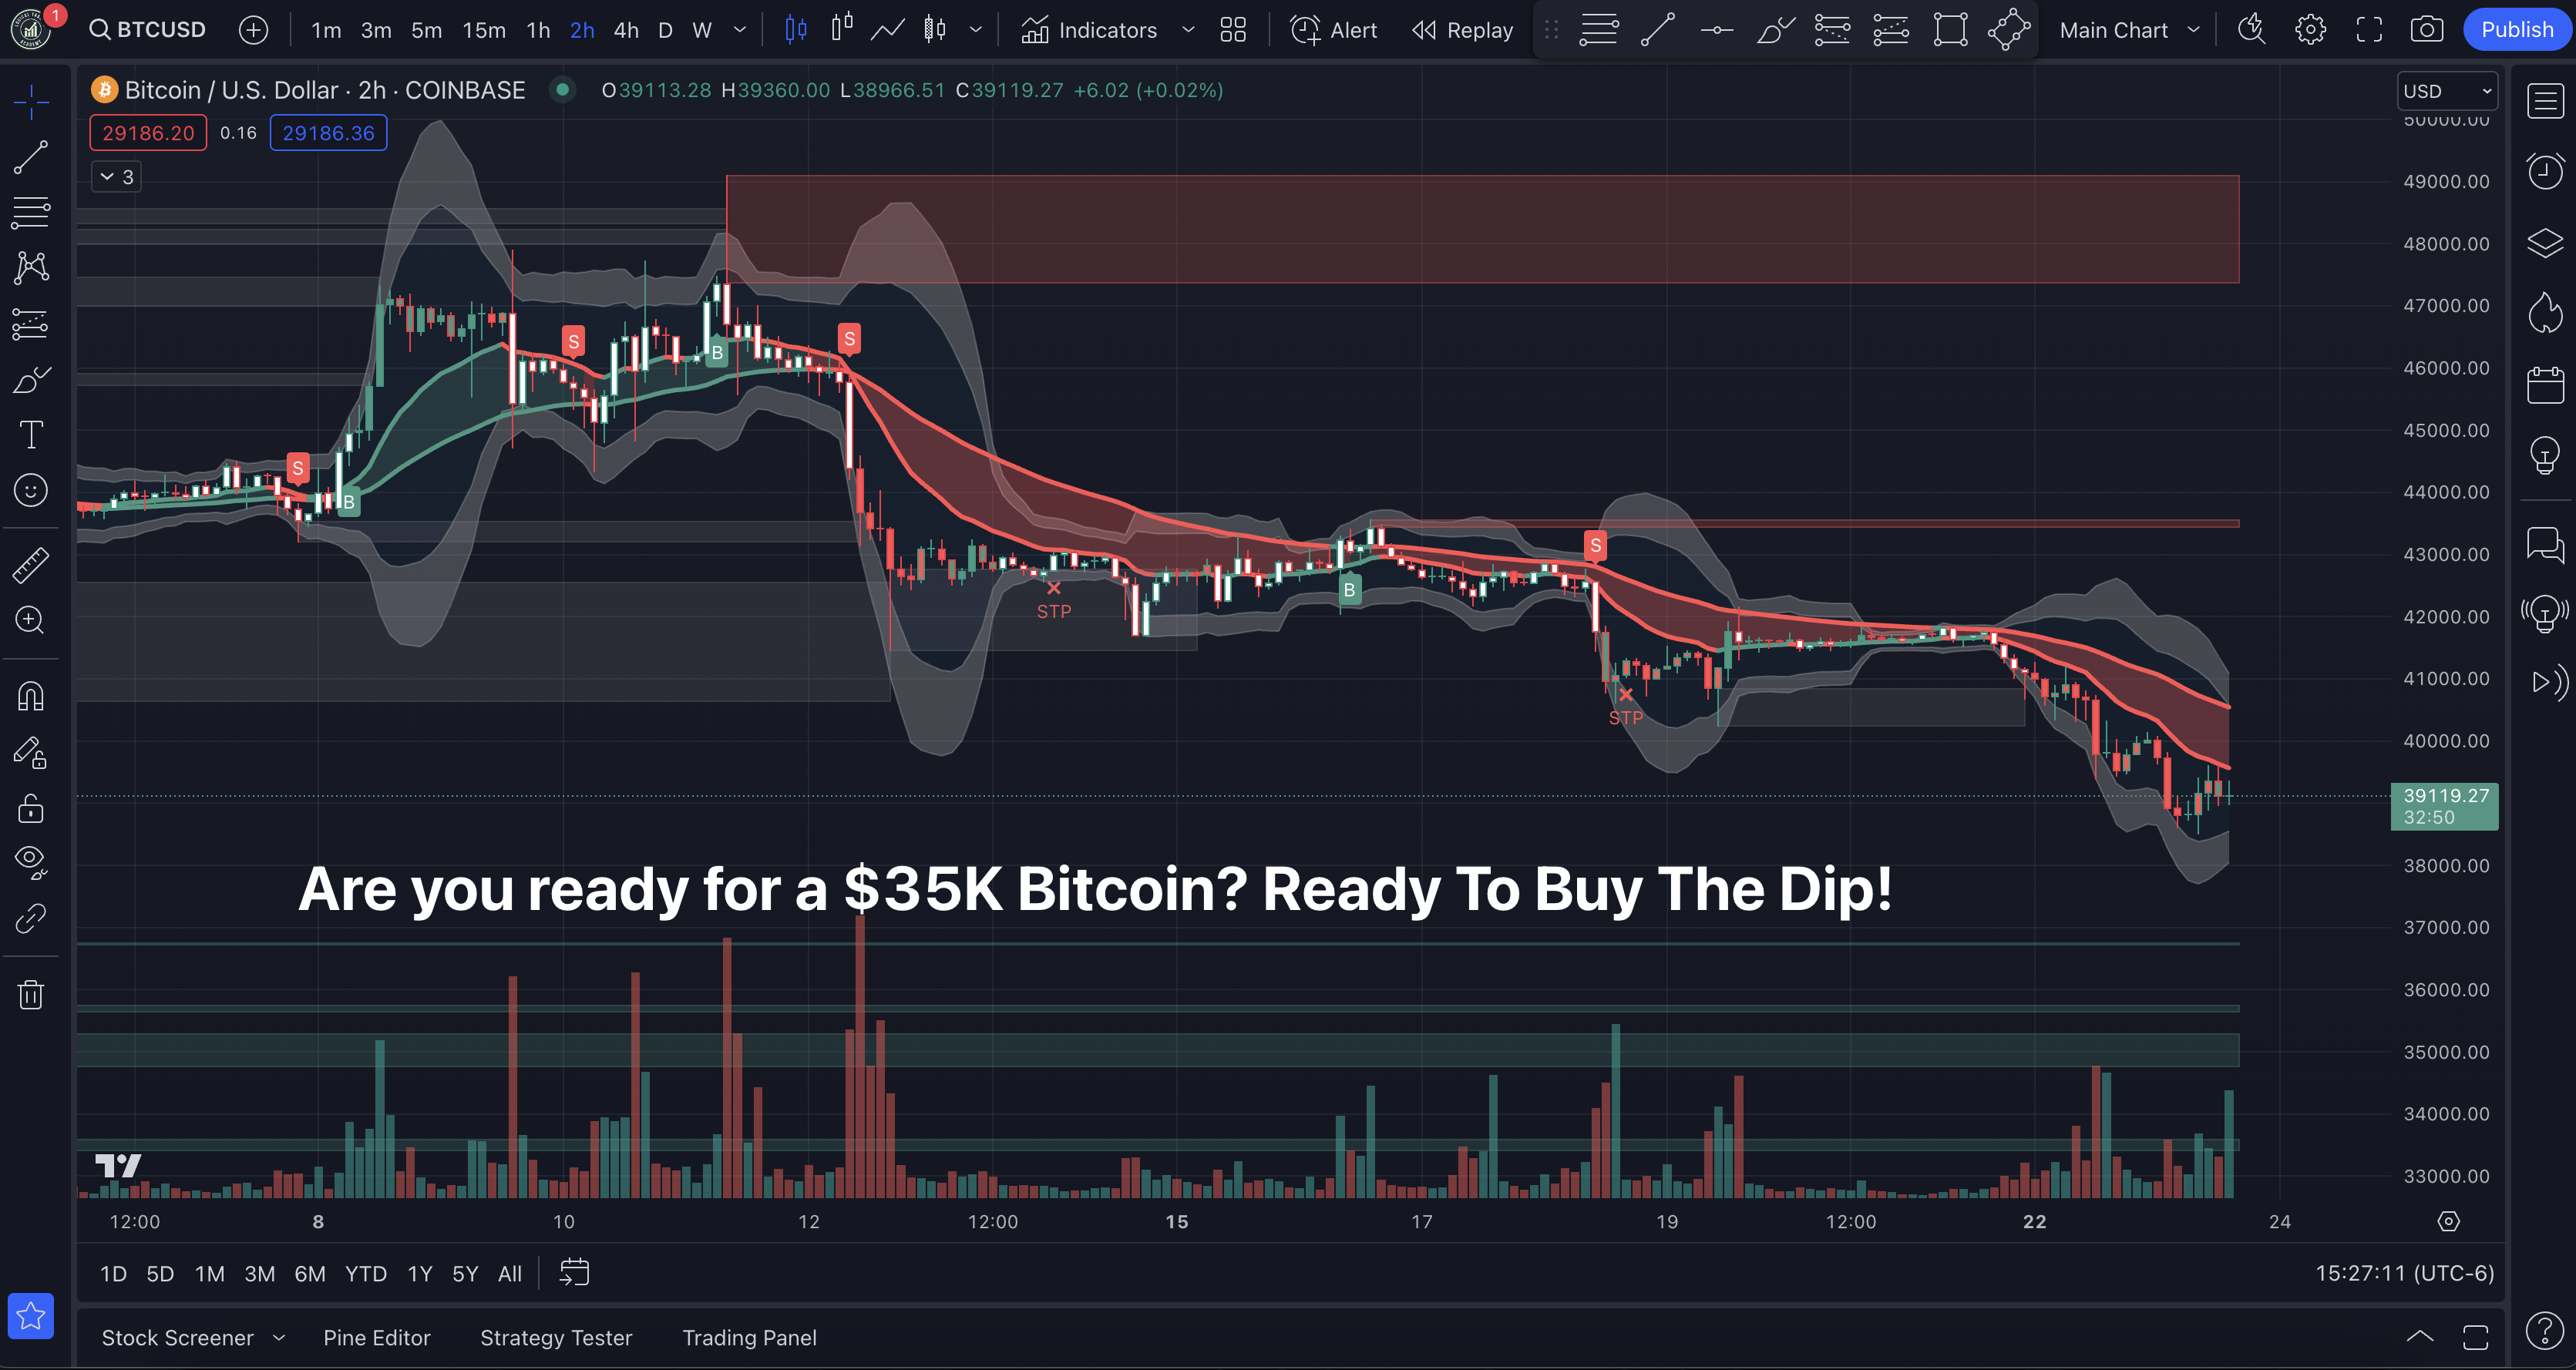 ready to buy the dip.